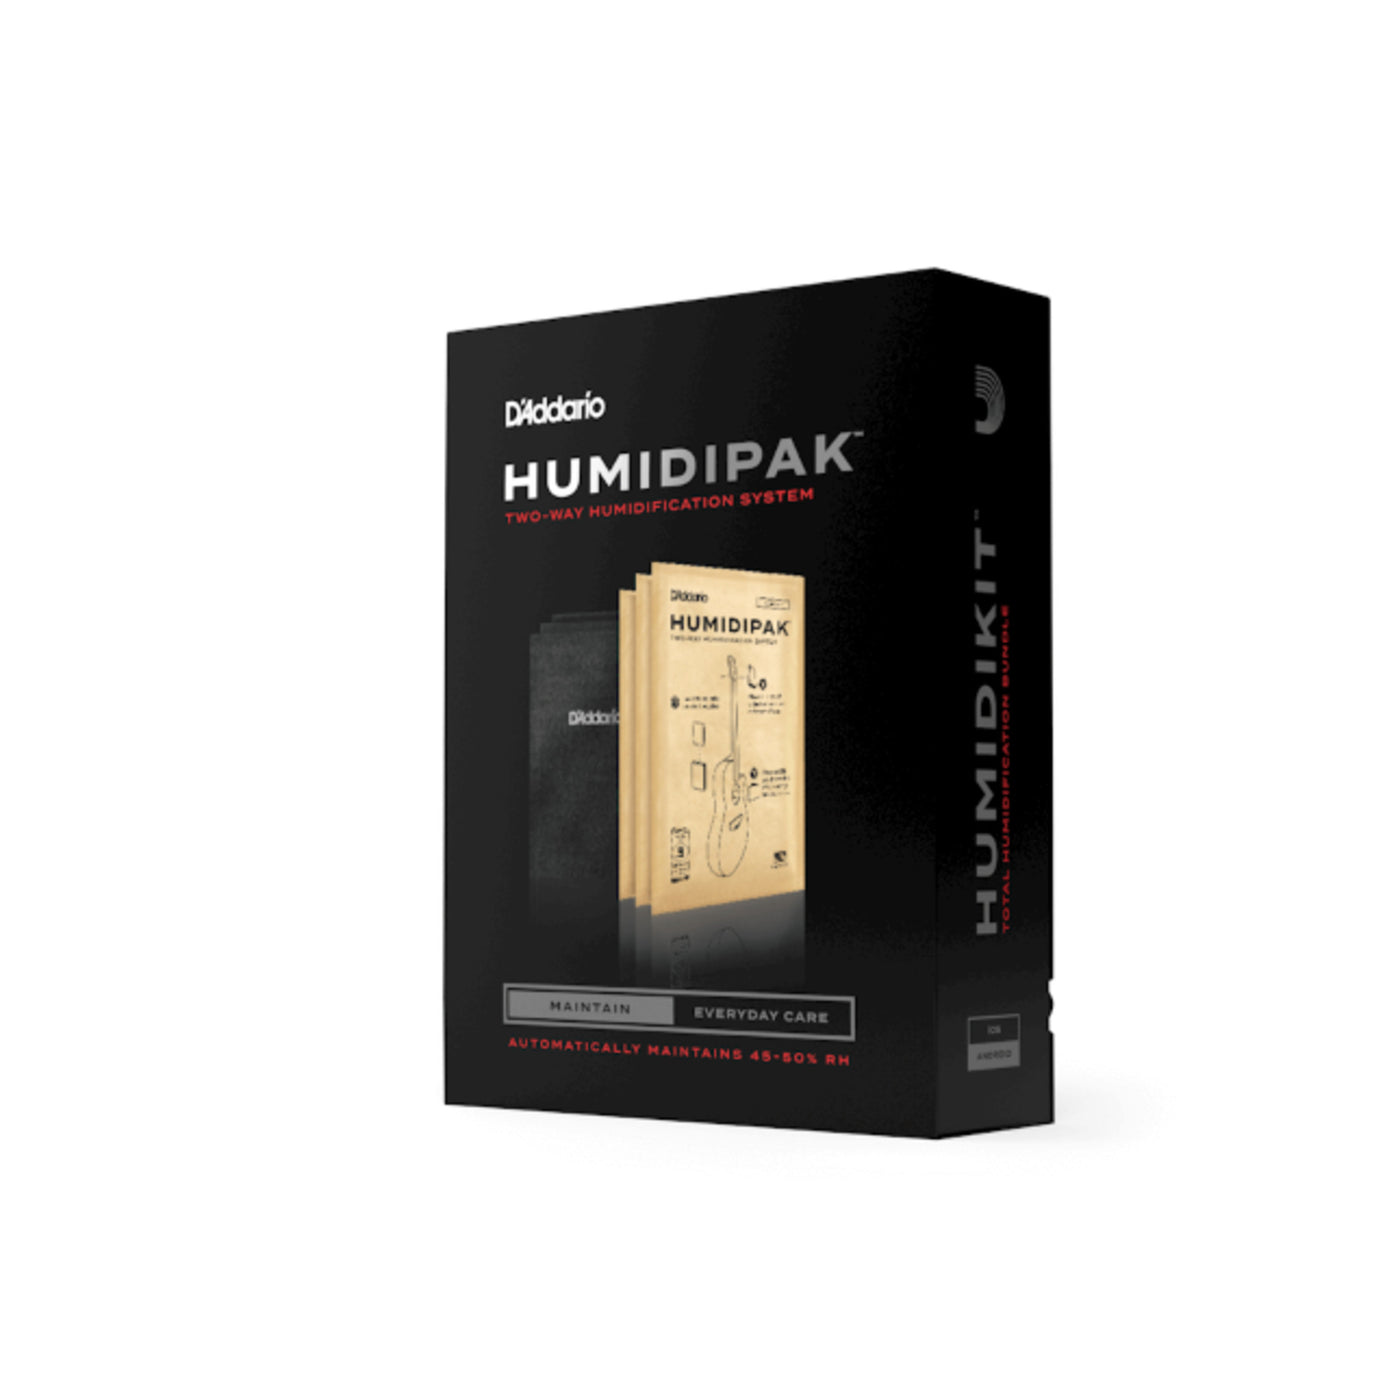 D'Addario Humidipak Automatic Humidity Control System for Guitars (PW-HPK-01)